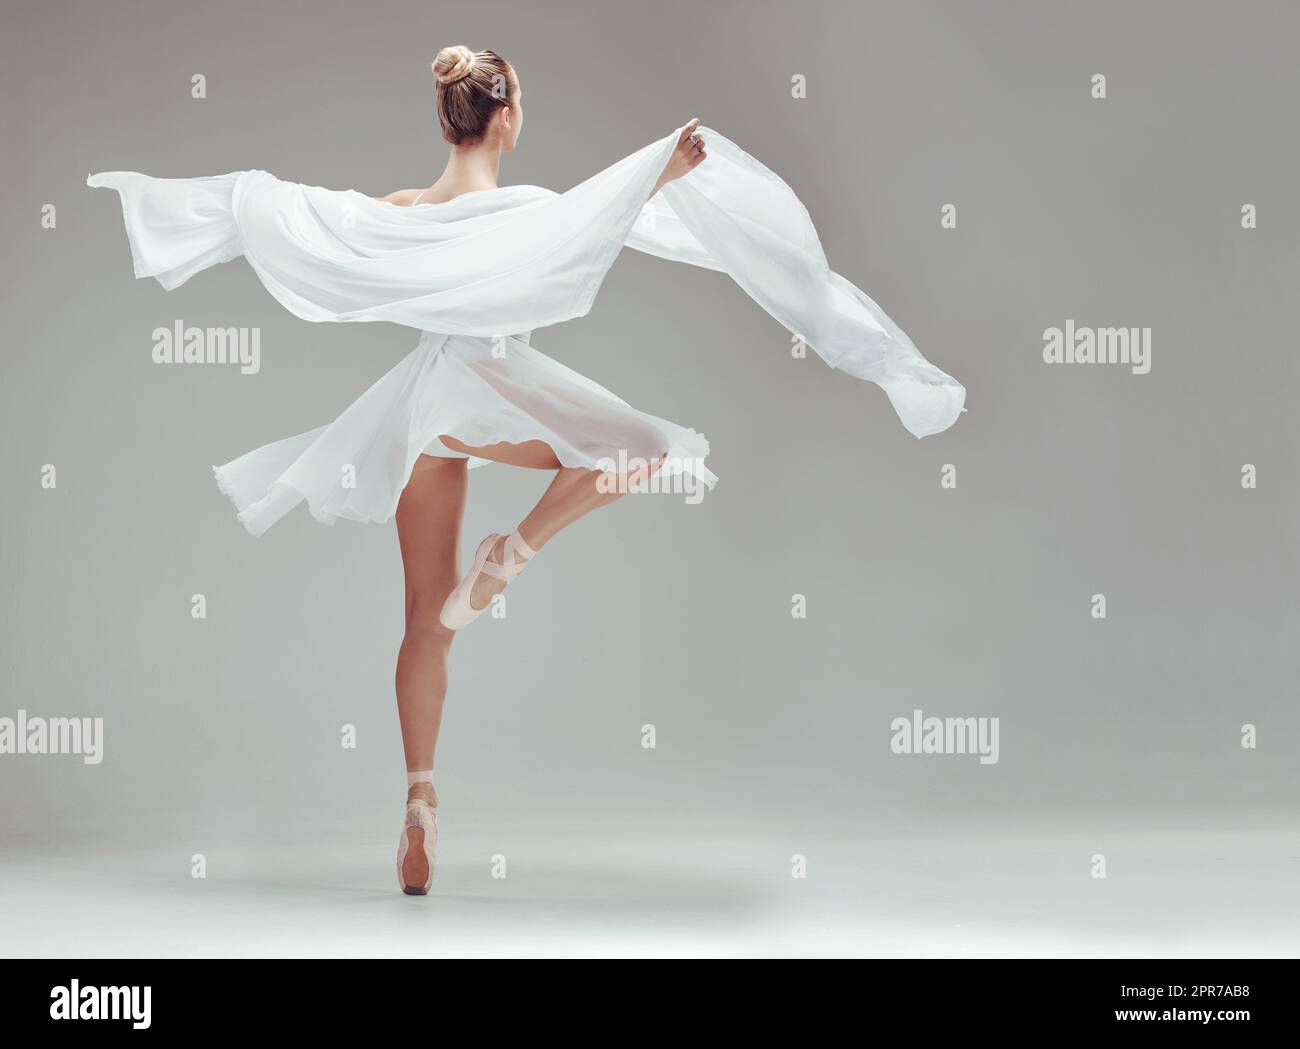 Dance is my form of expression. Full length shot of an unrecognisable ballerina dancing alone in the studio. Stock Photo